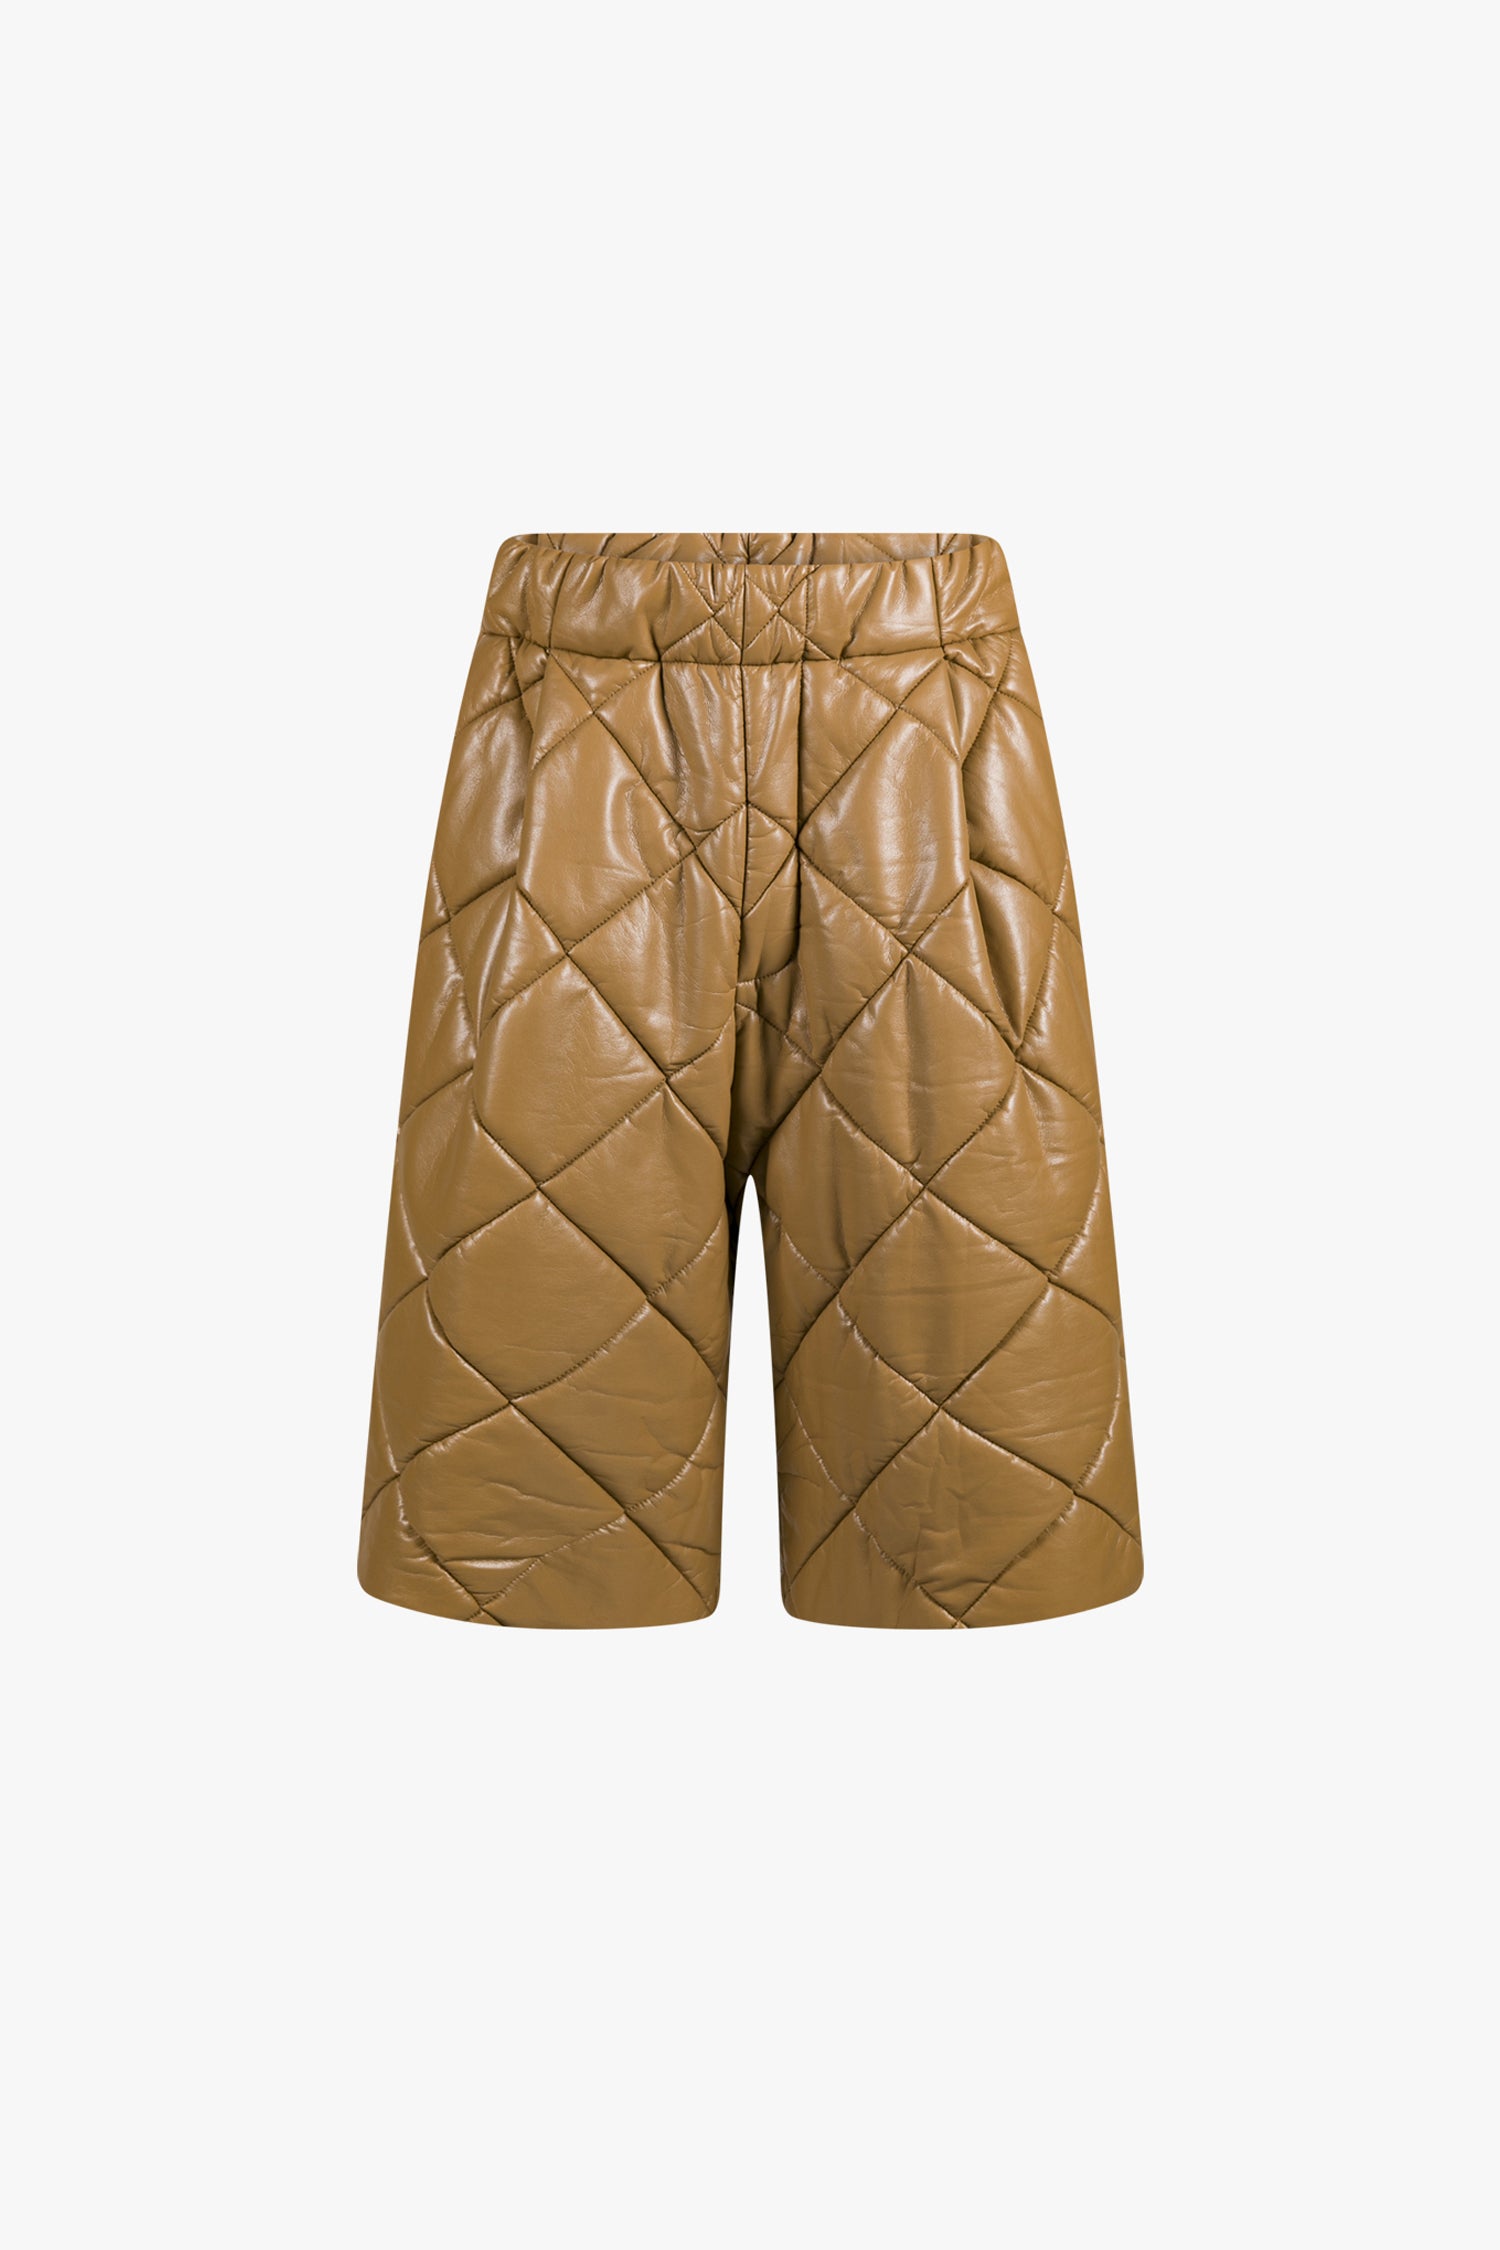 PARNELL PANTS IN CAMEL, AW22-23